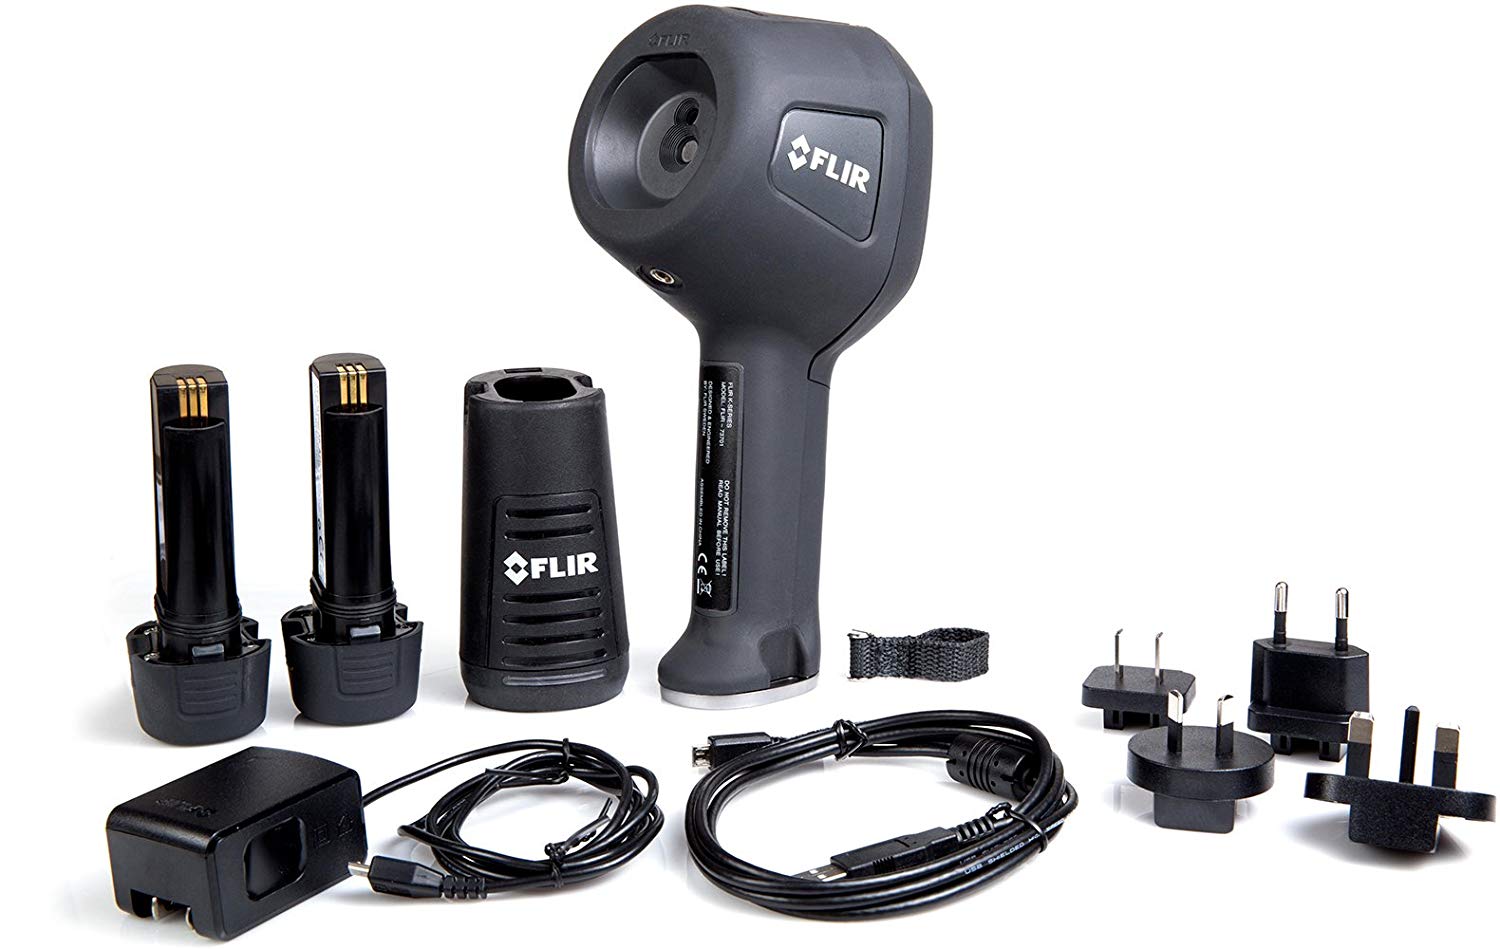 FLIR K2 Thermal Imaging Camera with 160 × 120 IR Resolution and MSX